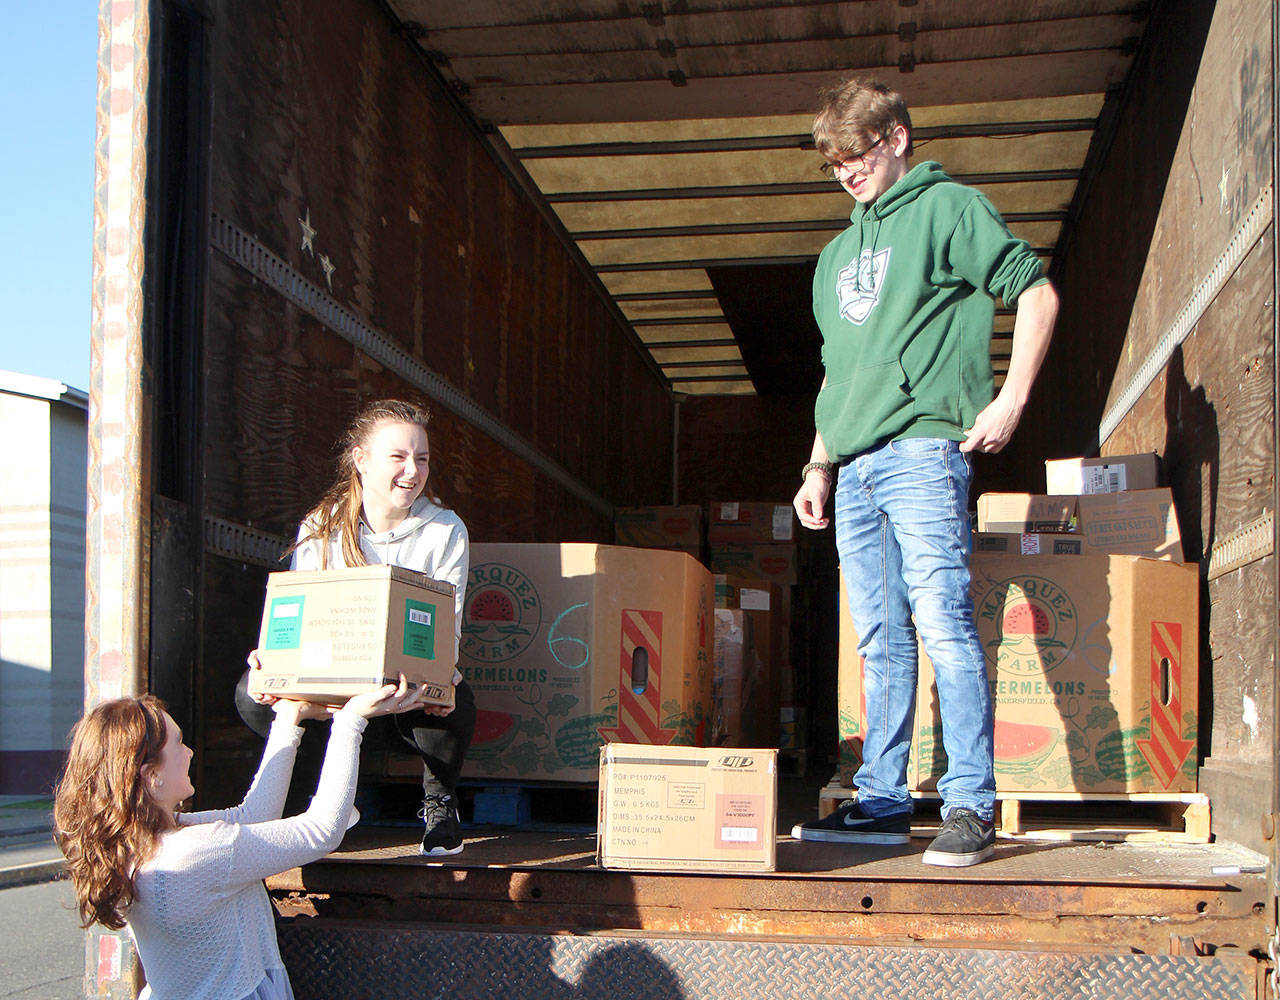 Montesano High School junior Honour Iversen, from left, re-enacts the loading of food with sophomore Cassadie Golding and senior Max Urbanski for the benefit of a photographer who missed the first loading Monday, Dec. 3, 2018, in Montesano. The food was collected for students’ Food Bowl paper bag food drive. There still is an opportunity to give to the food drive. If you have a bag of food to give, you can call the school (360-249-4041) and they will send somebody by to pick it up. Or you can drop it off at the school at 303 N. Church St. Donations also are being accepted online at montesano.revtrak.net. Food and money will go to the Montesano Food Bank.